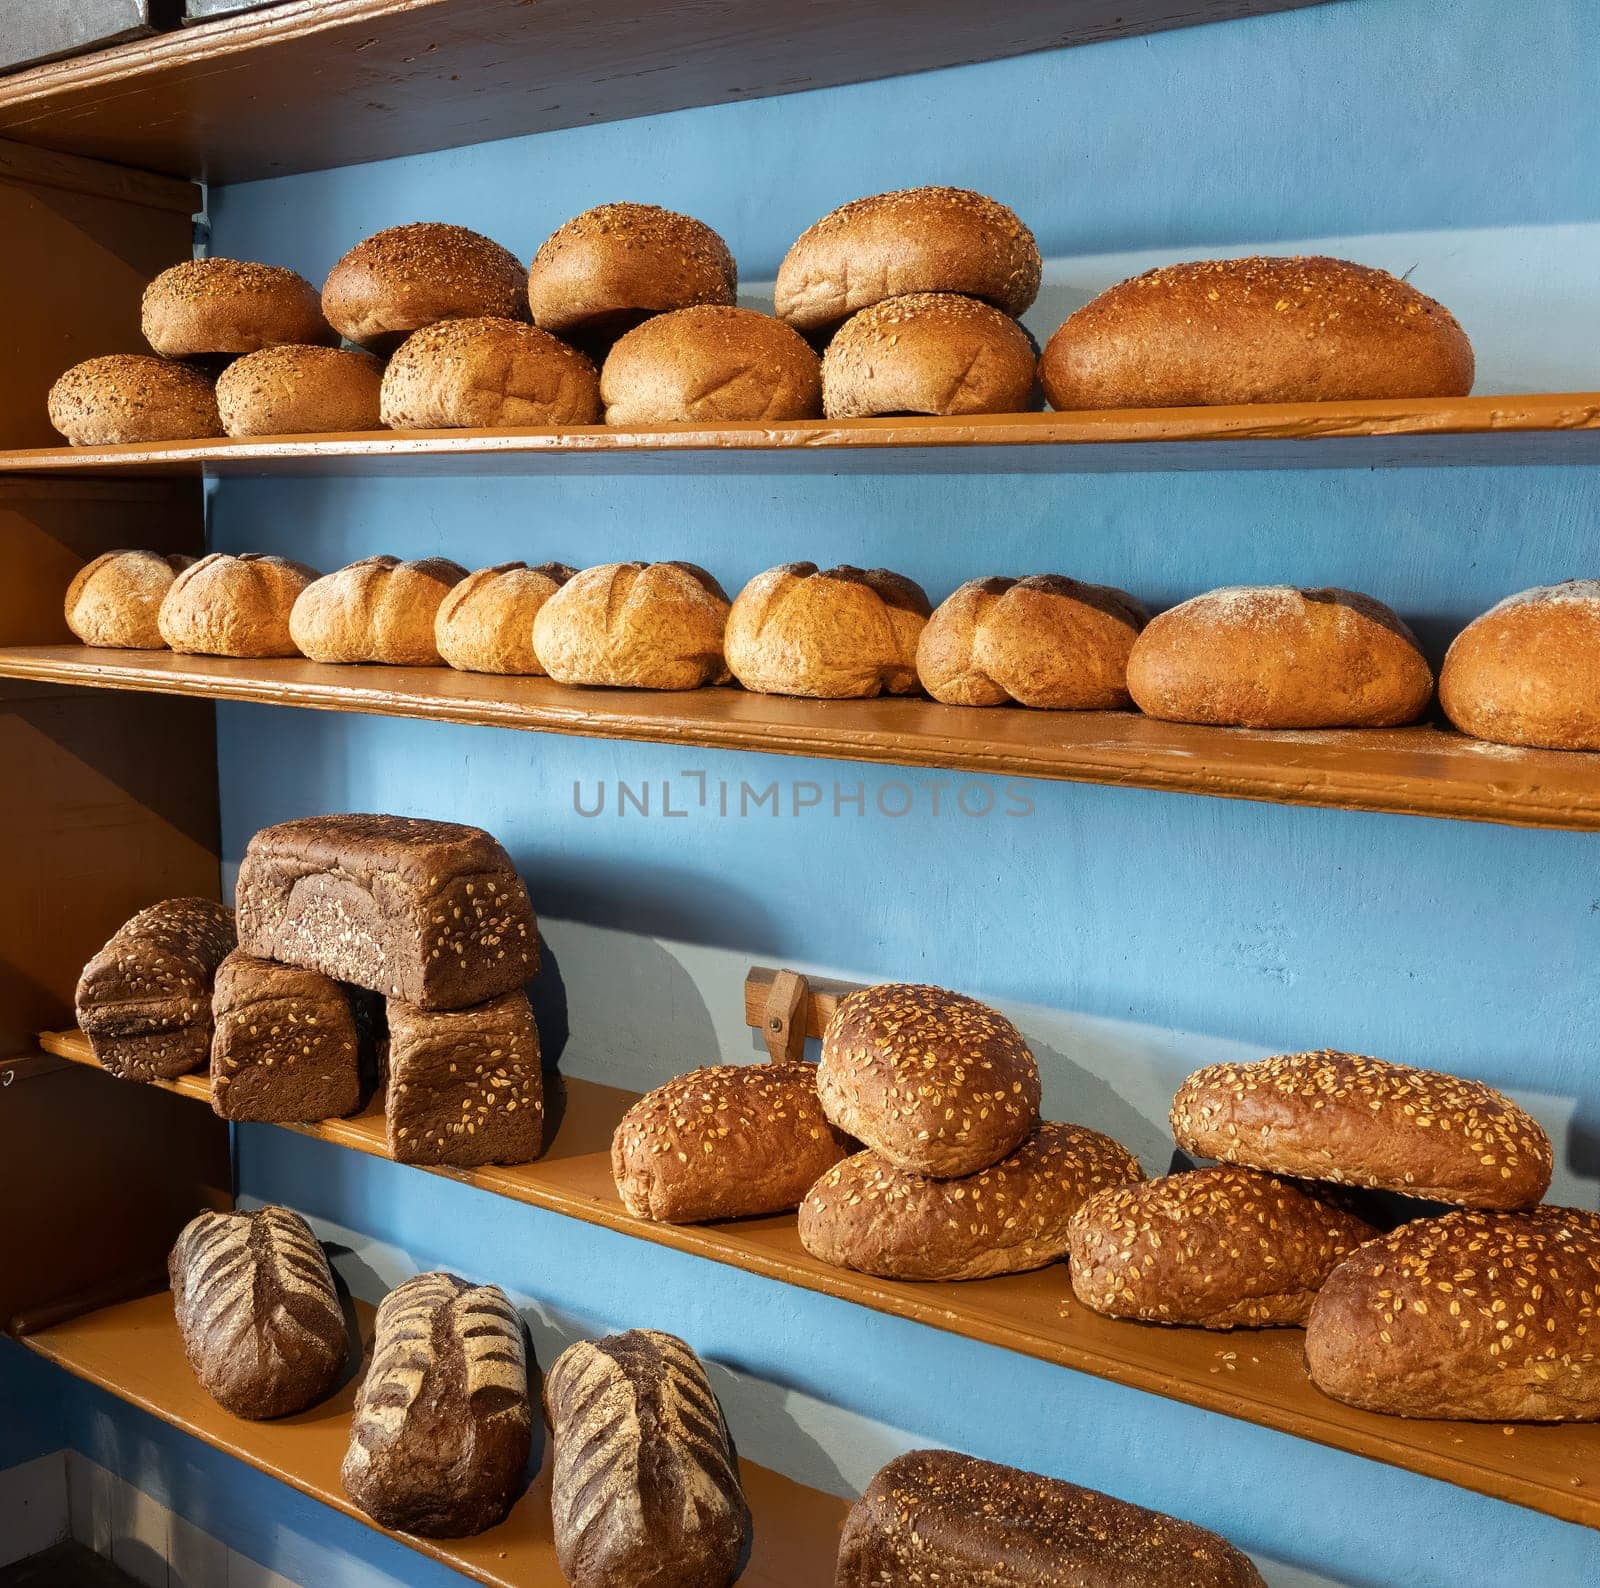 bread and different types of bakery products by compuinfoto